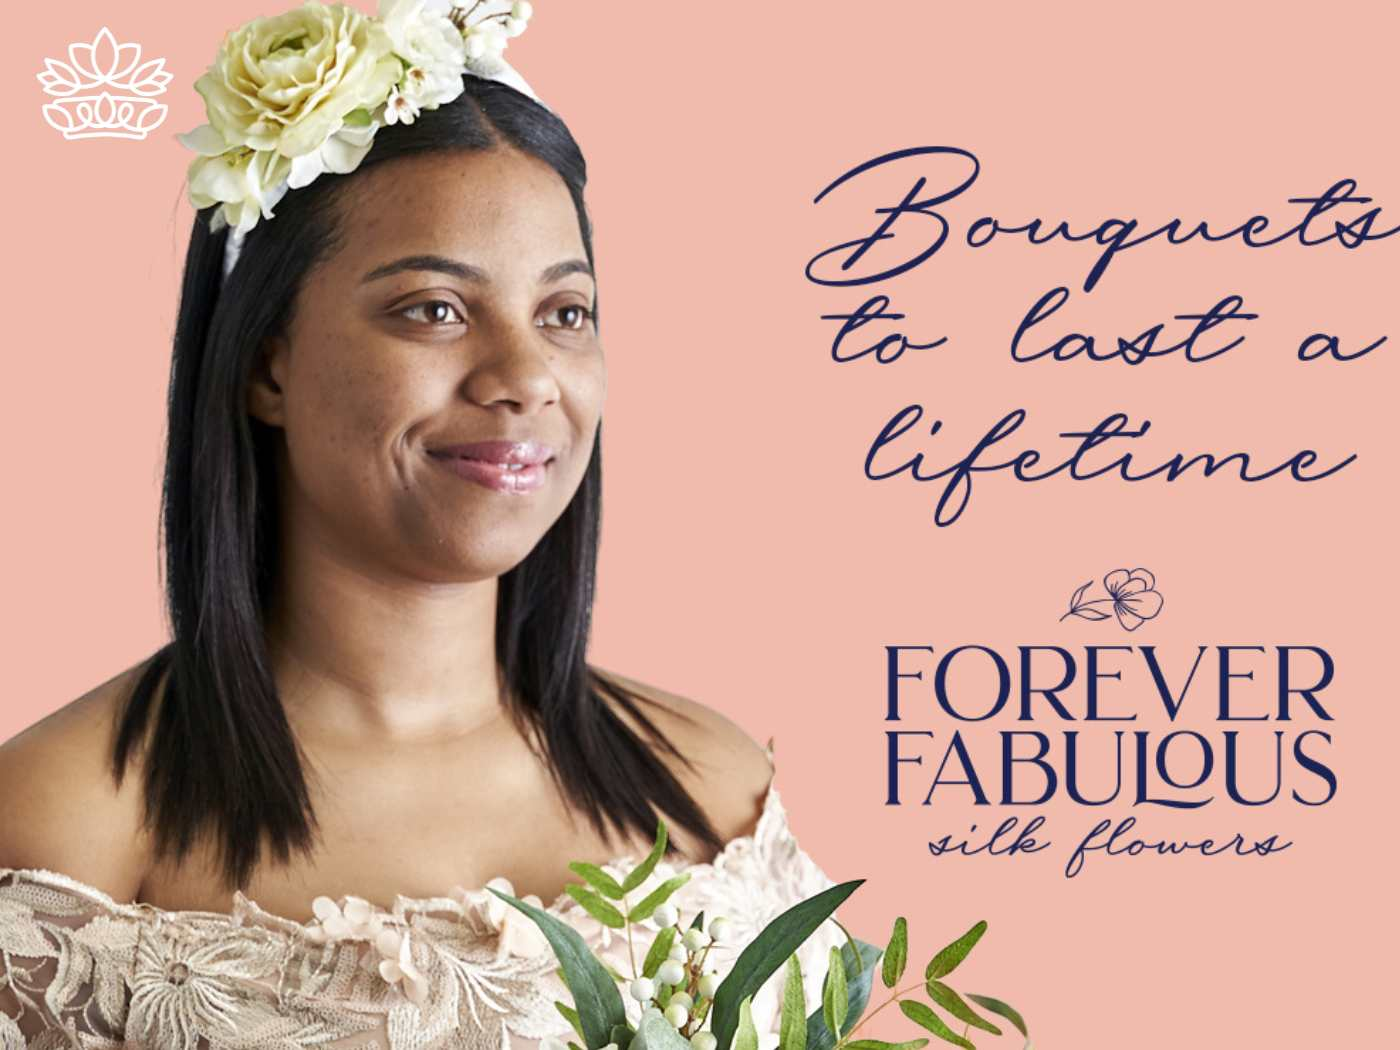 A woman smiles softly, wearing a headband adorned with silk flowers, with the text 'Bouquets to last a lifetime' and 'FOREVER FABULOUS silk flowers', symbolizing enduring elegance, available at Fabulous Flowers and Gifts.